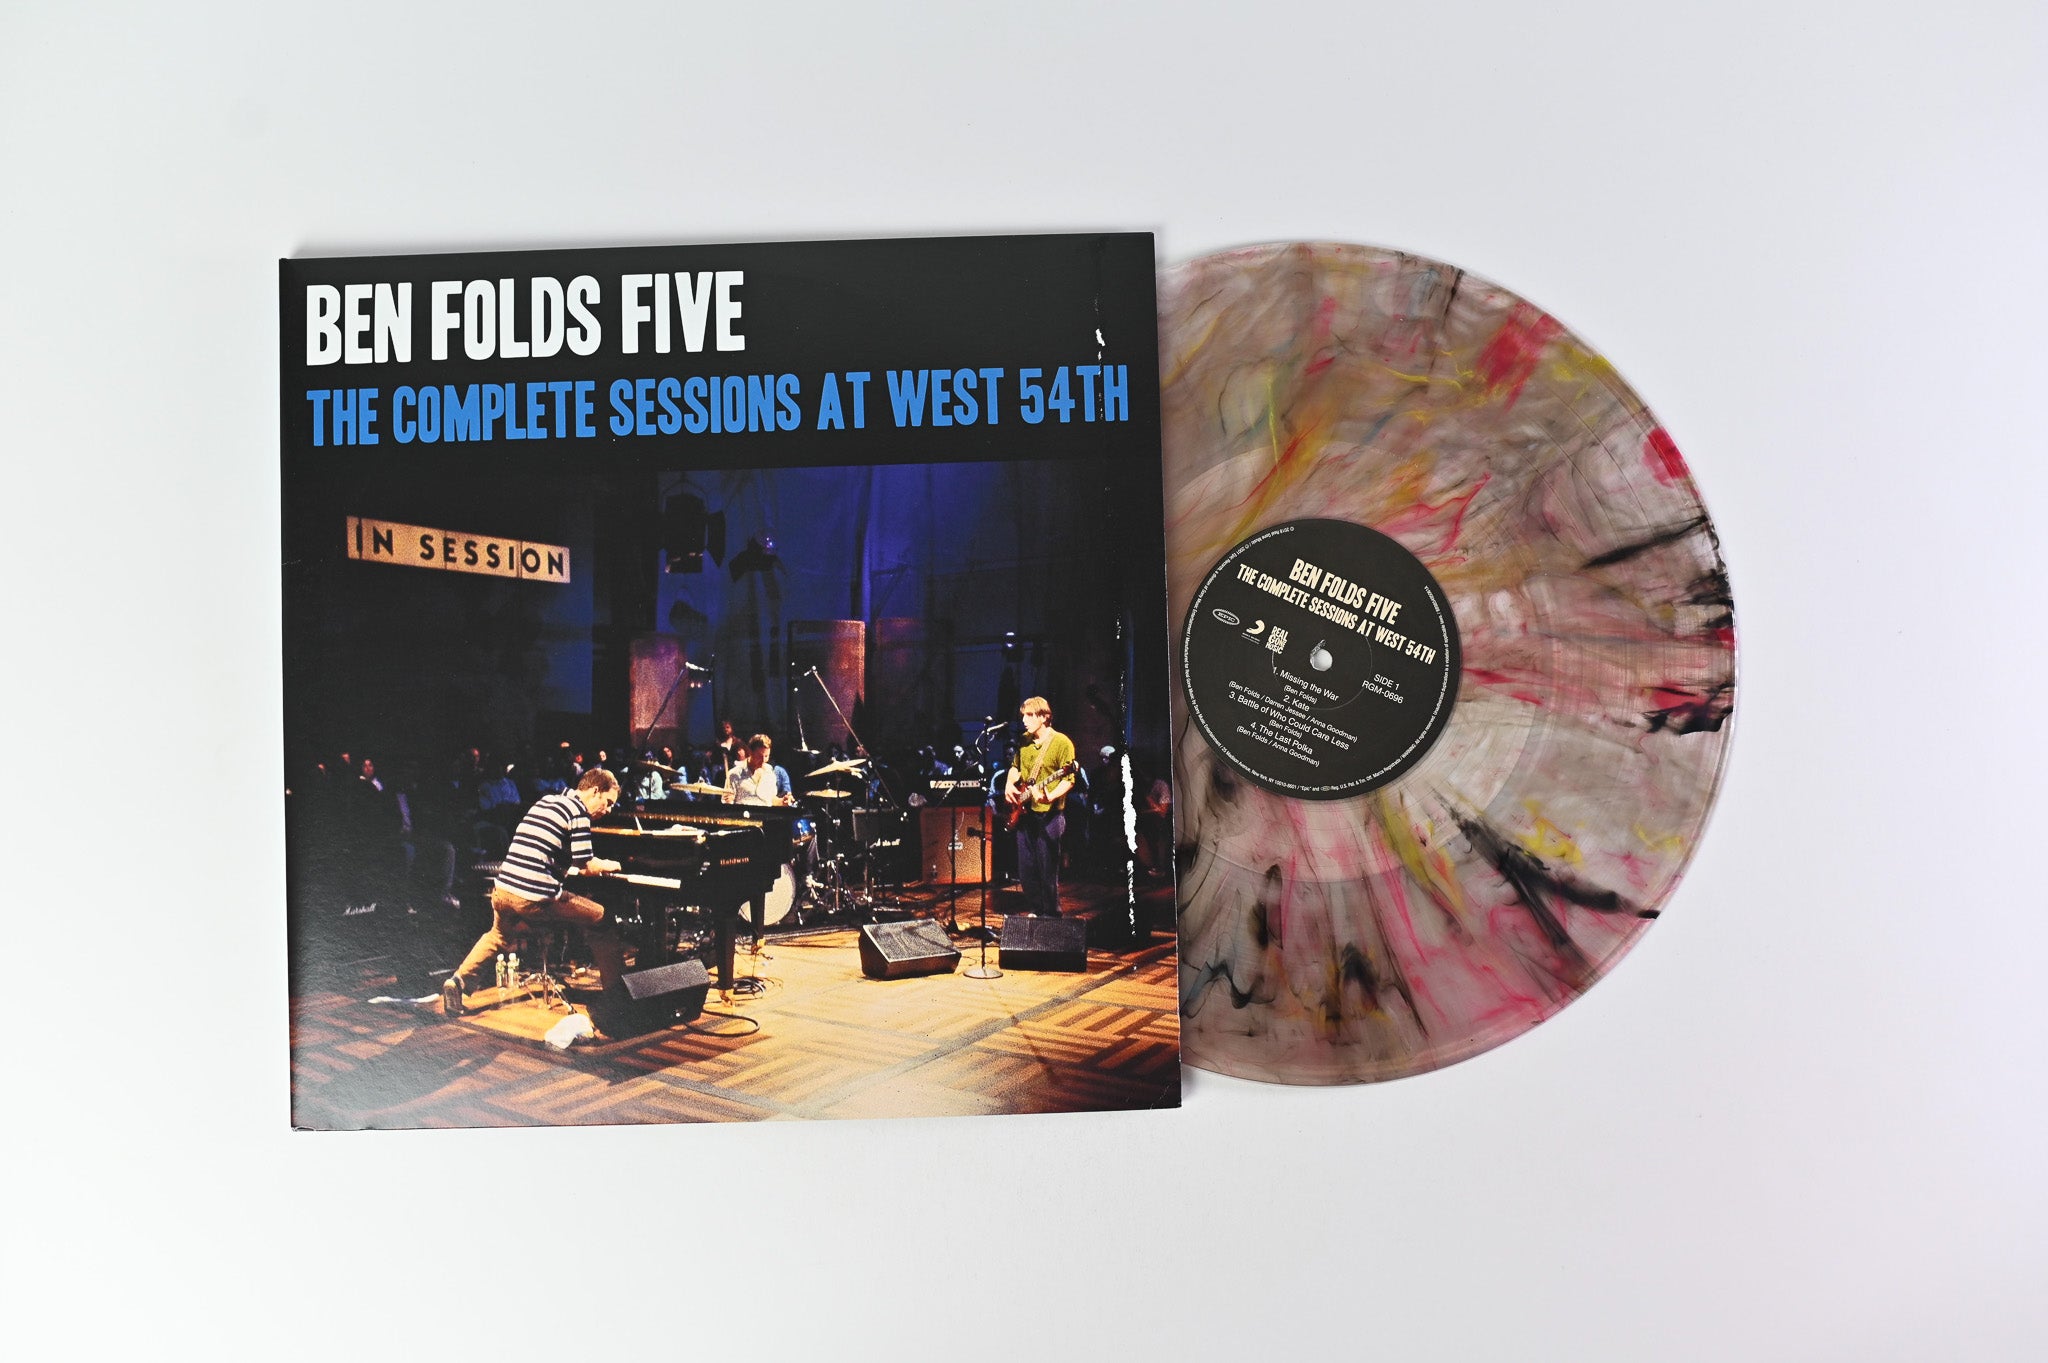 Ben Folds Five - The Complete Sessions At West 54th on Real Gone Ltd Black & Tan Scuffed Parquet